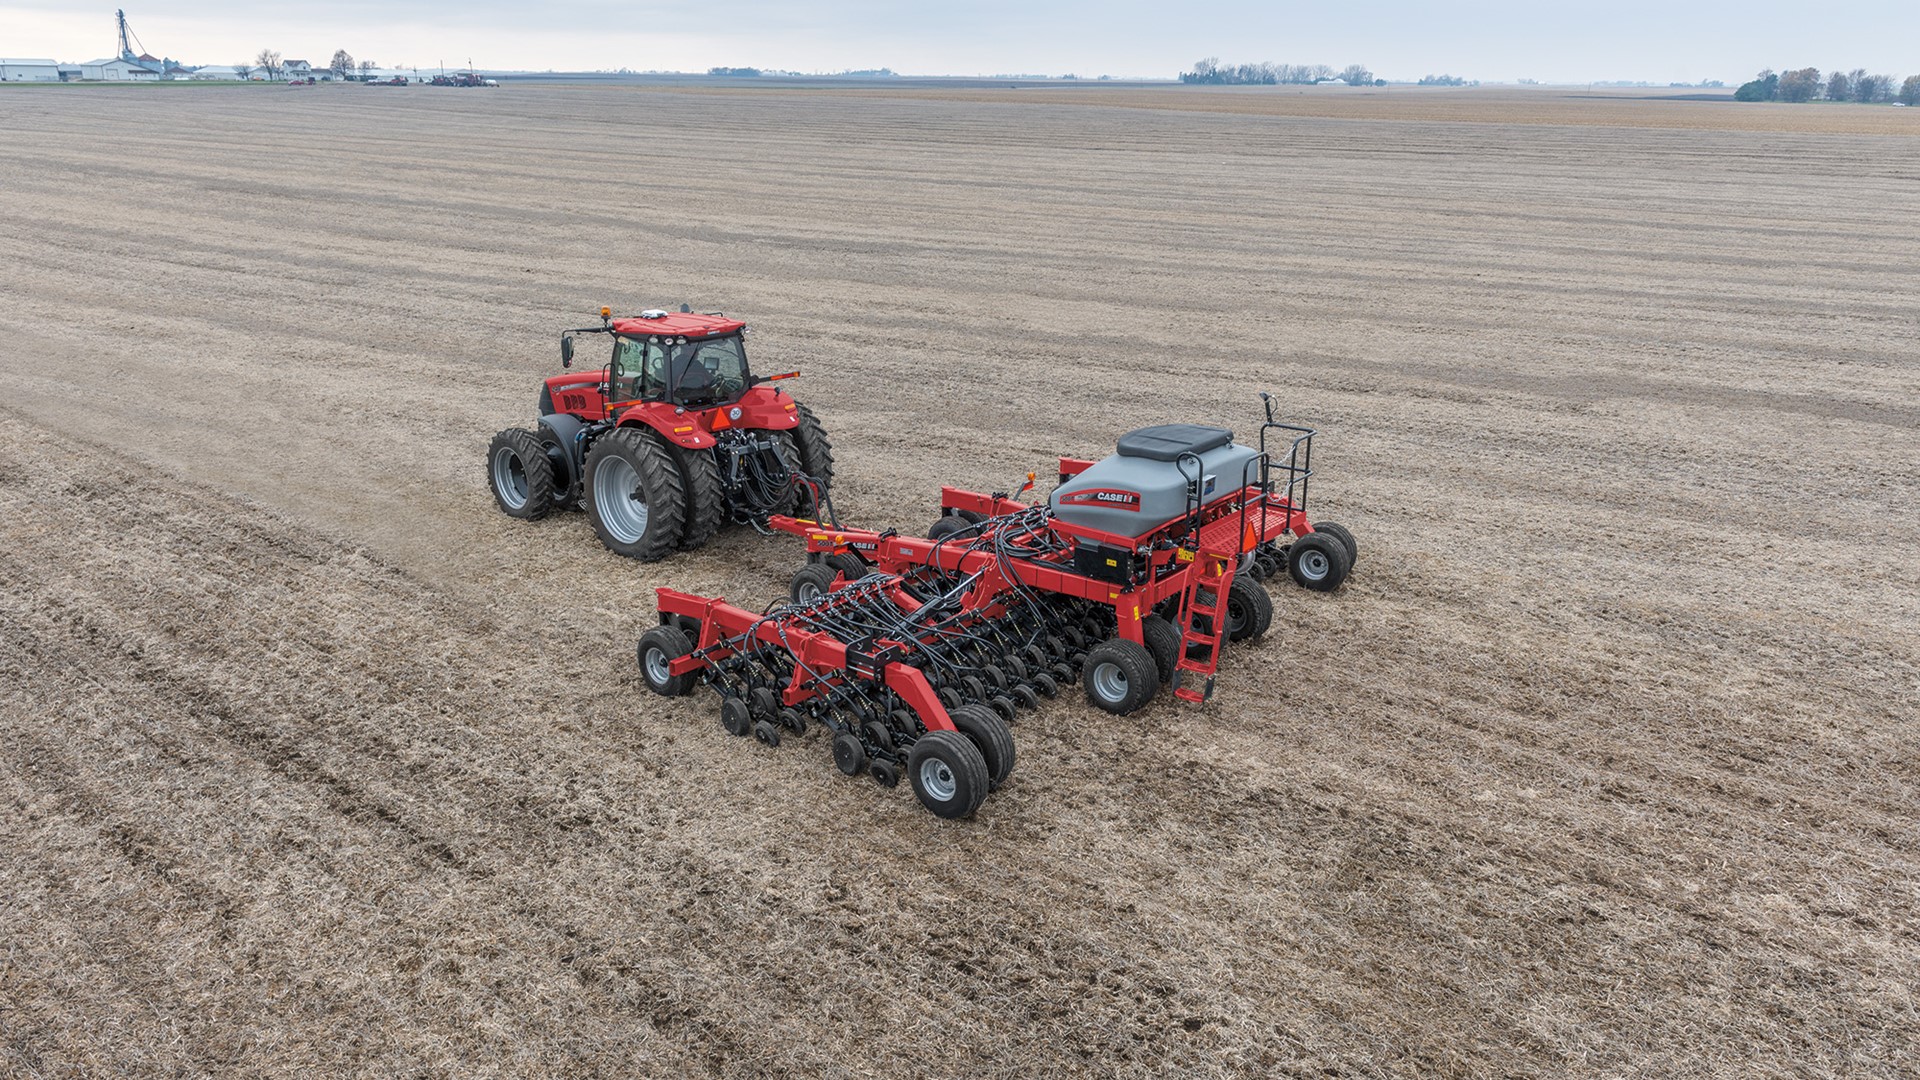 The Case IH Precision Disk 500T single disk air drill features unmatched maneuverability for high-efficiency seeding.